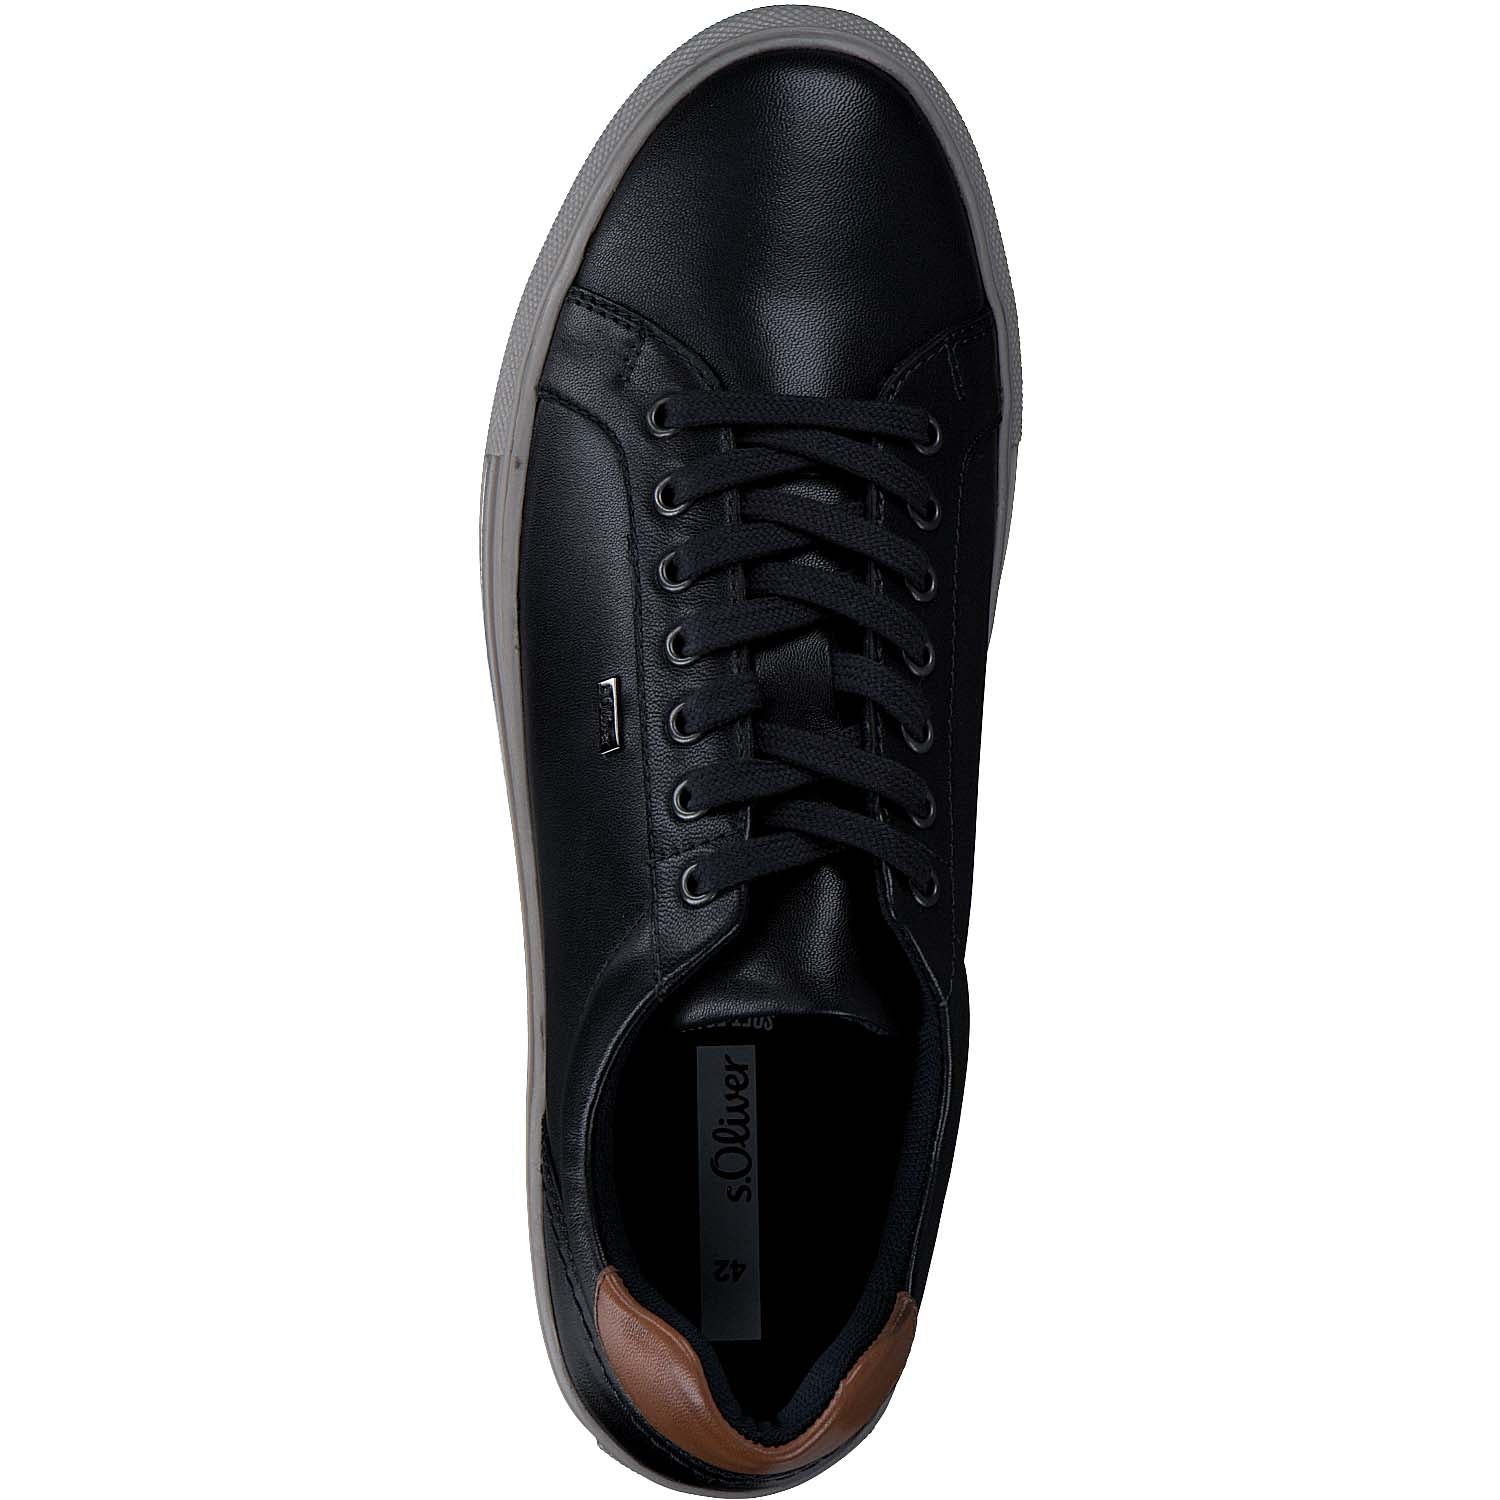 Front view of the S. Oliver Men's Navy Flat Sole Runner.